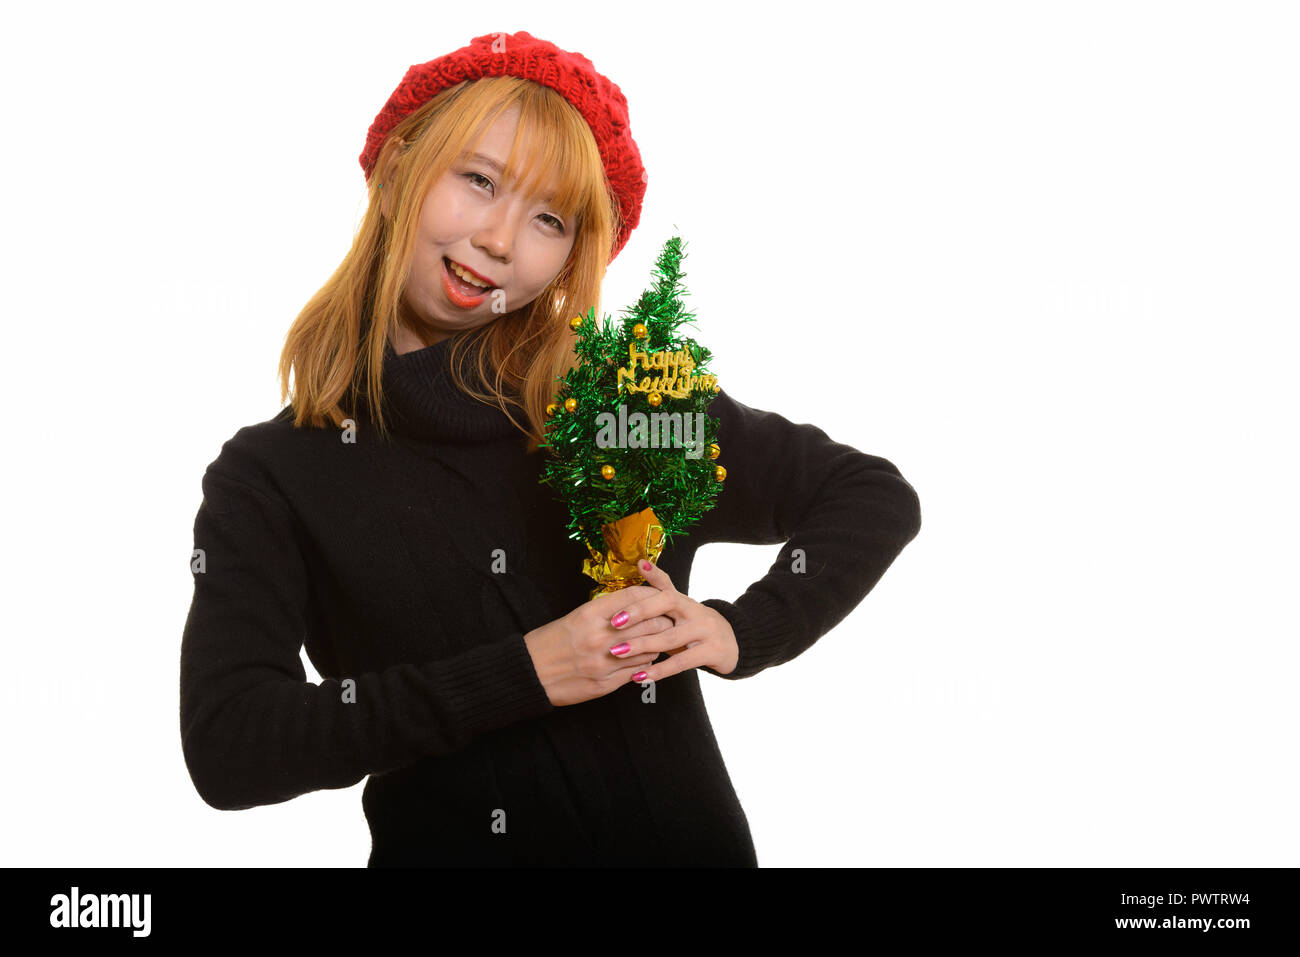 Cute happy Asian woman smiling while holding Happy New Year tree Stock Photo